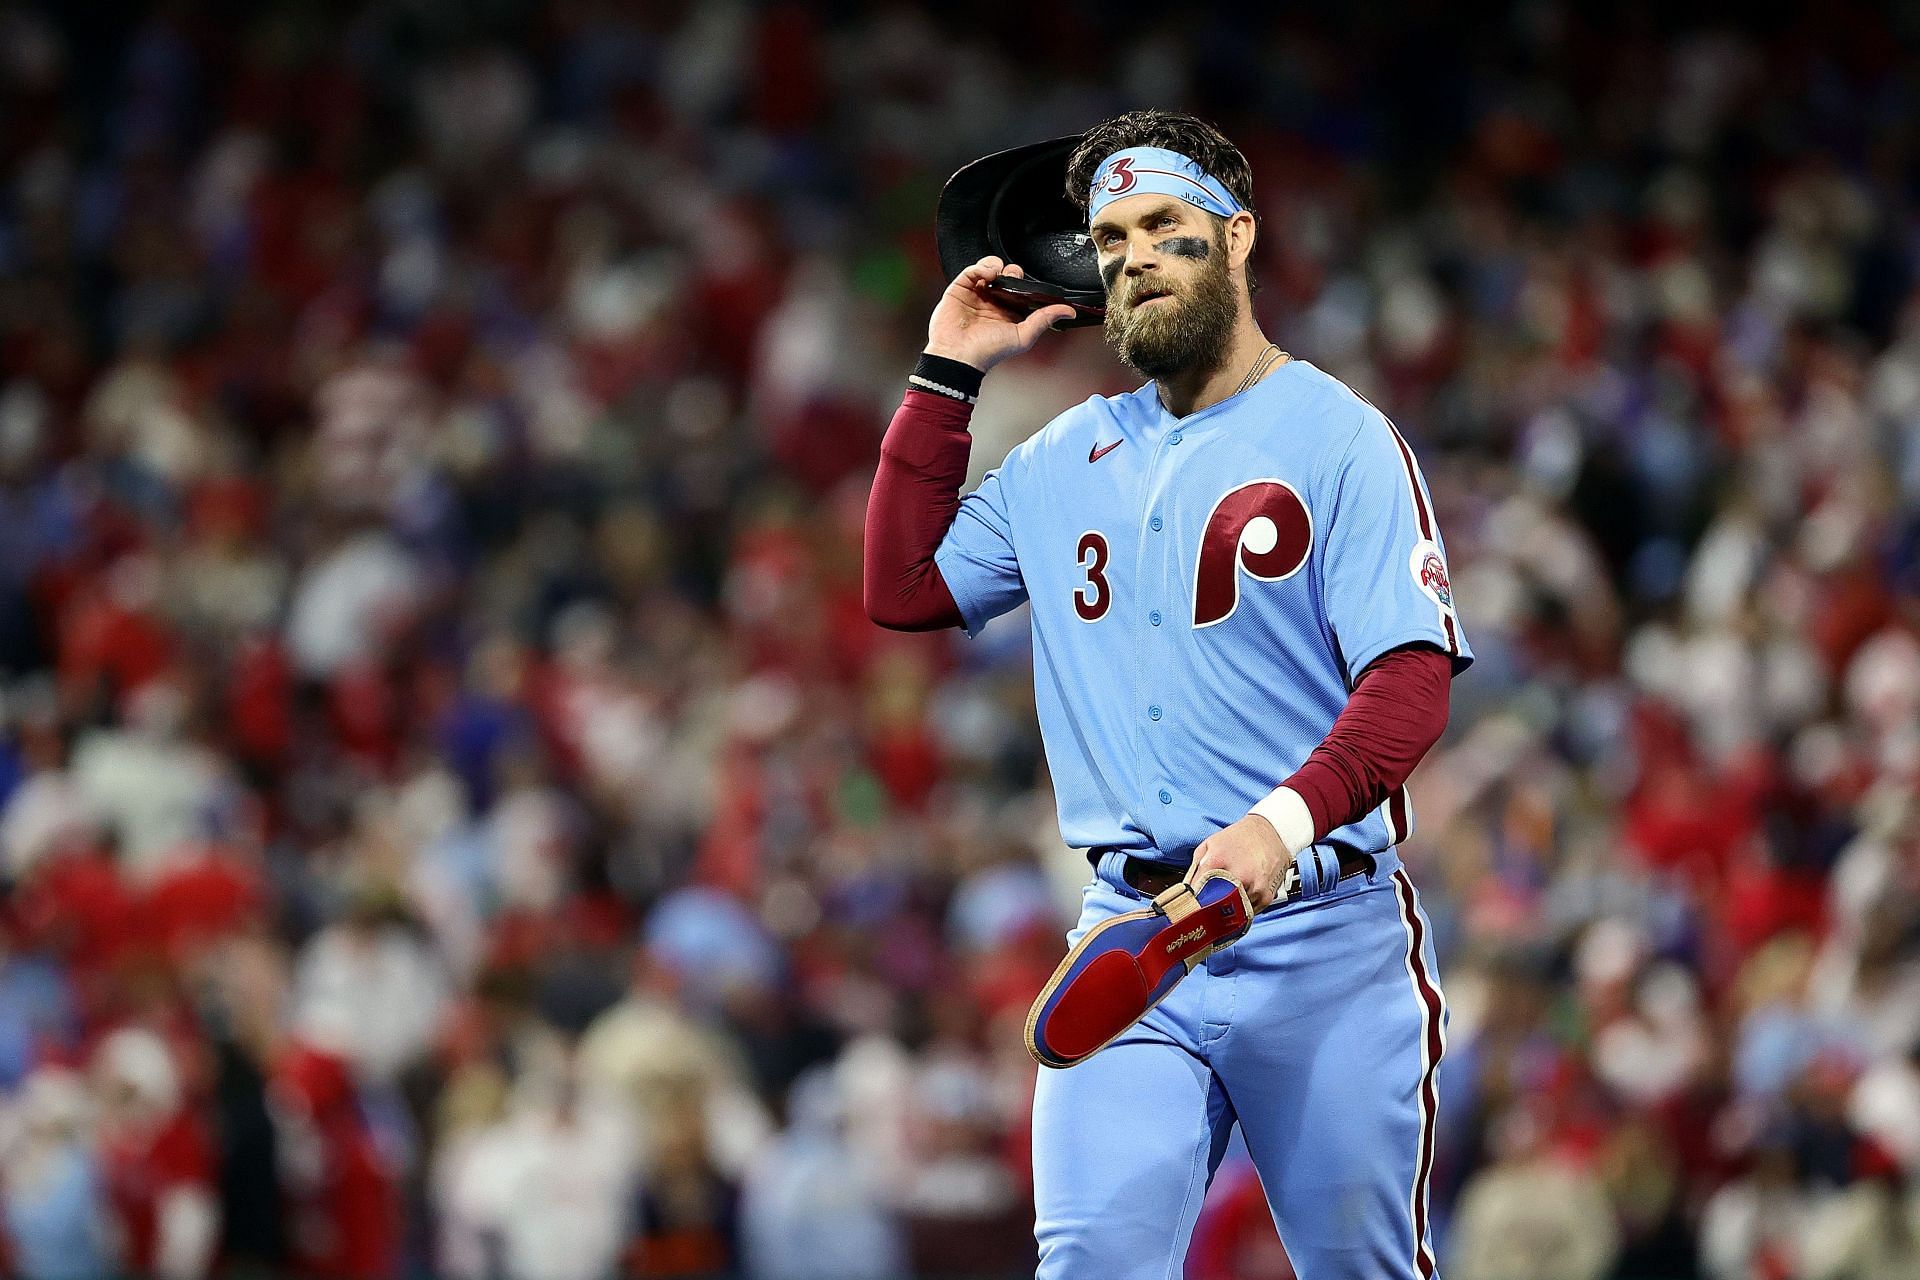 Bryce Harper Hoping for August Return After Thumb Surgery, per